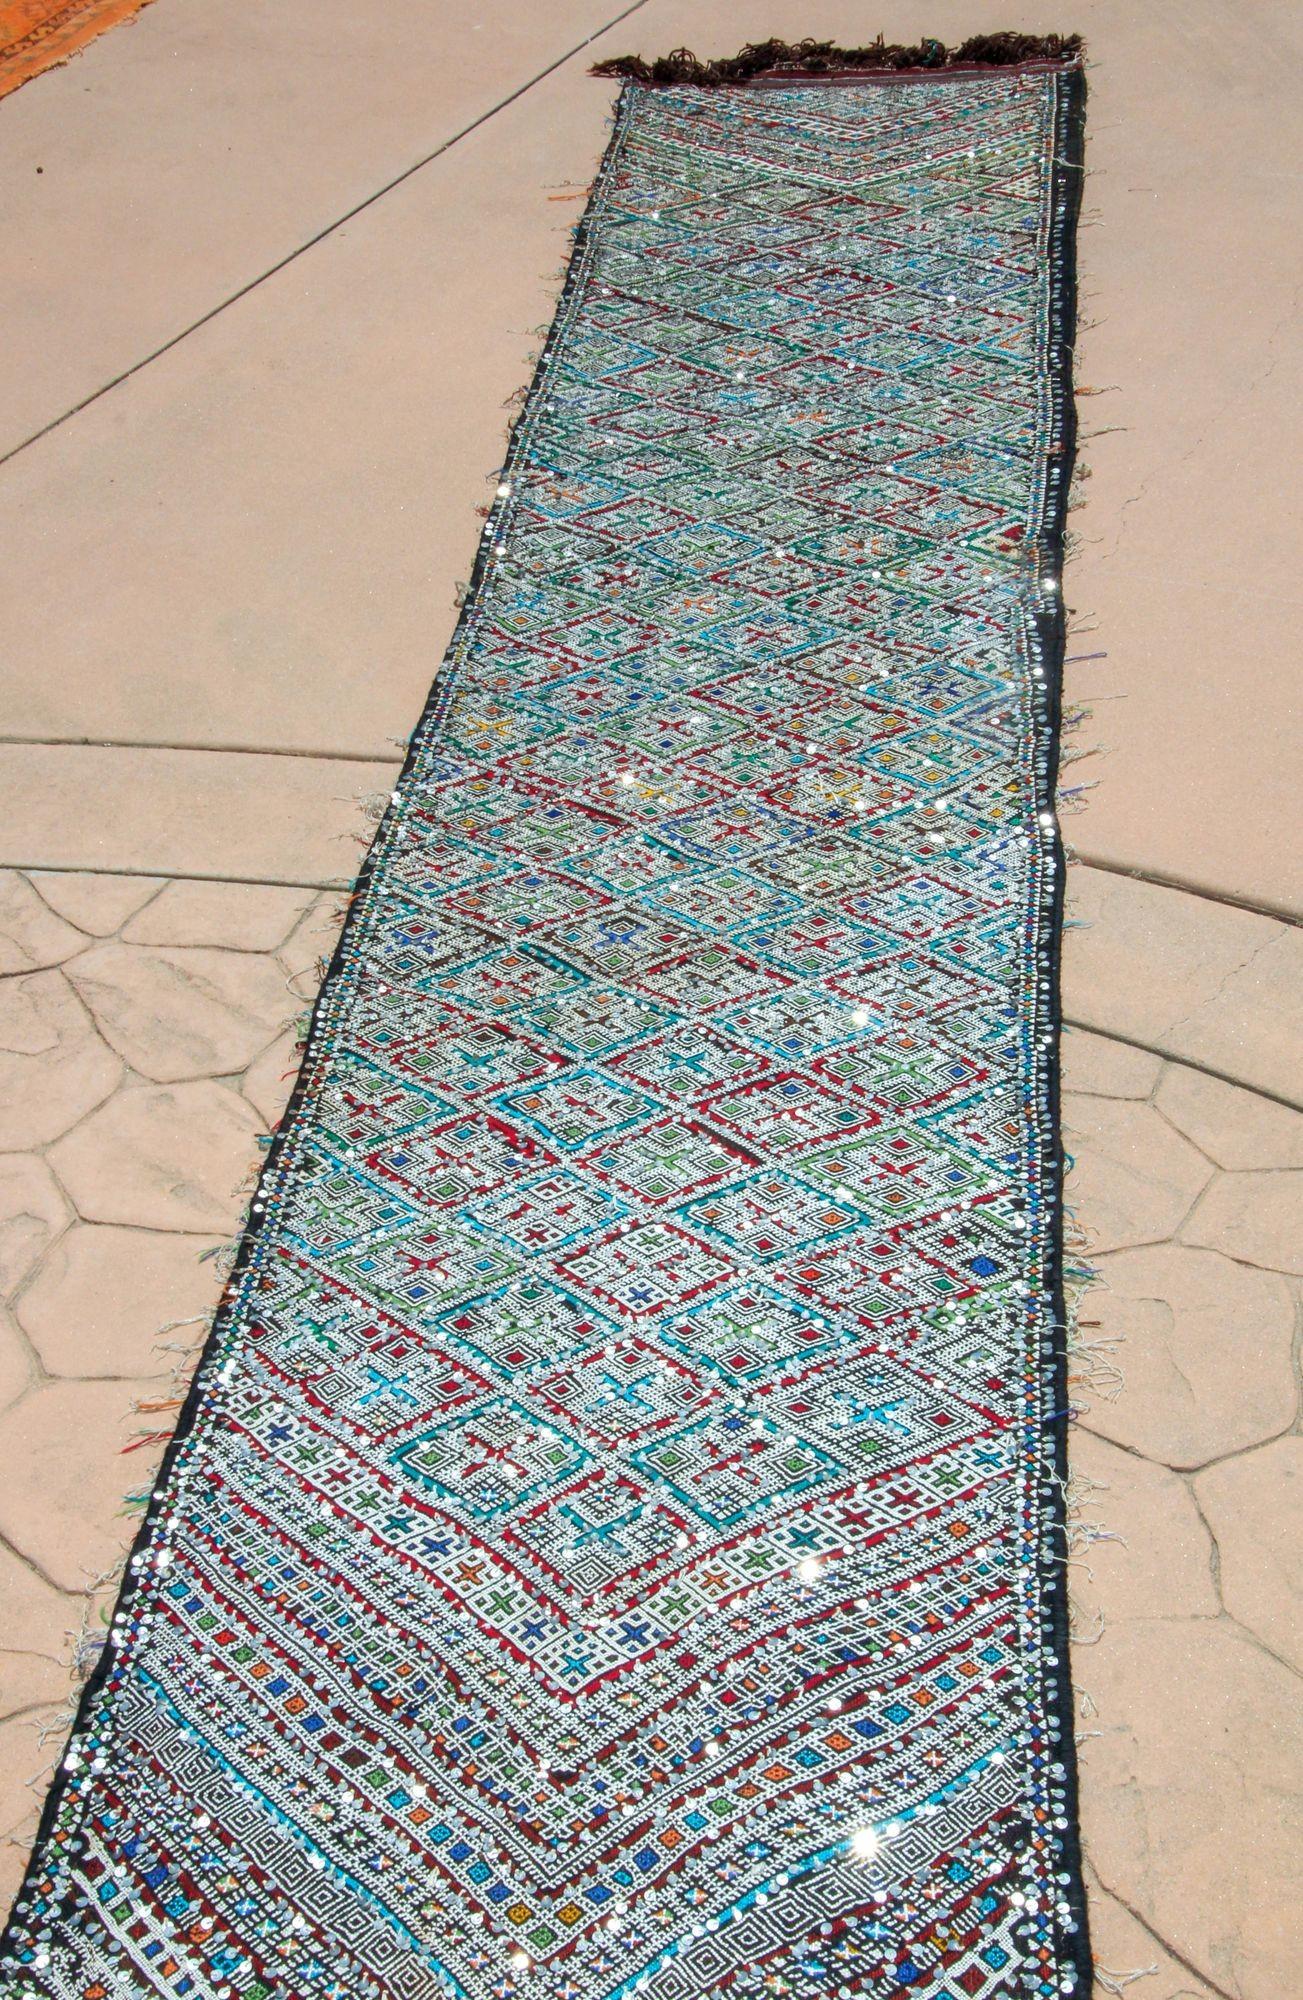 1950s Vintage Zemmour Moroccan Rug Berber Runner, 3ft x 16.4ft long In Good Condition For Sale In North Hollywood, CA